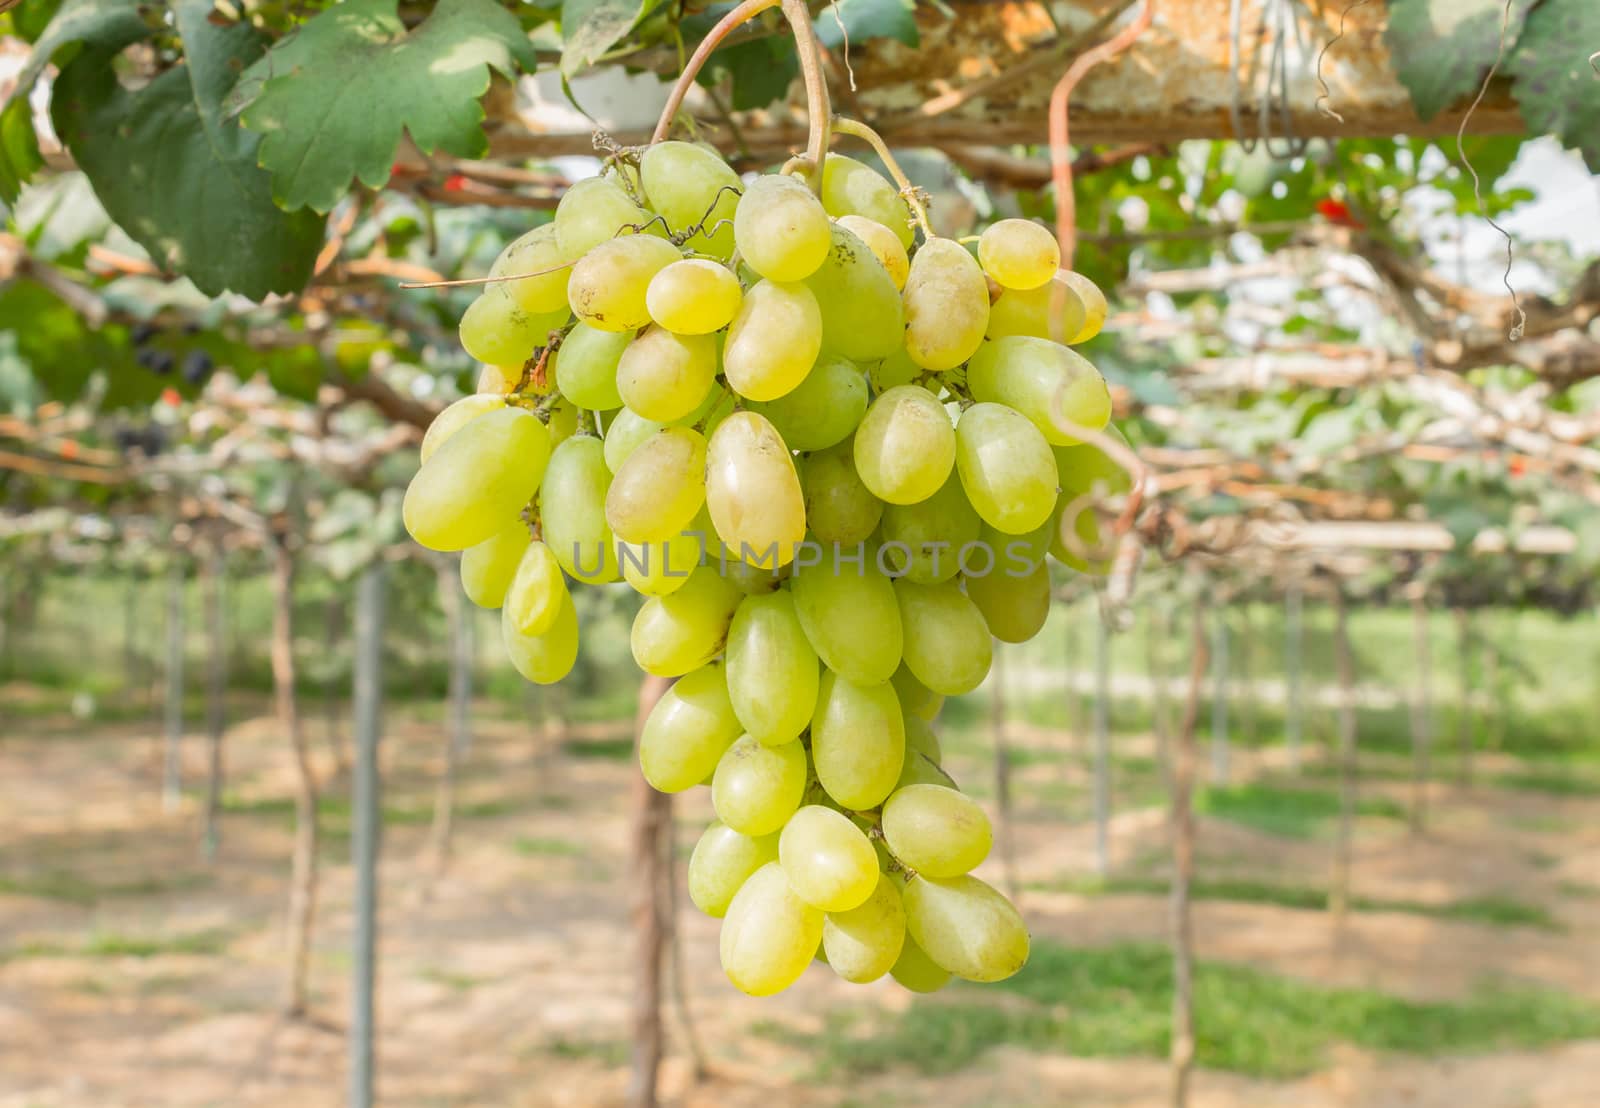 Green Grapes in Grape Garden or Vineyard Center Position by steafpong